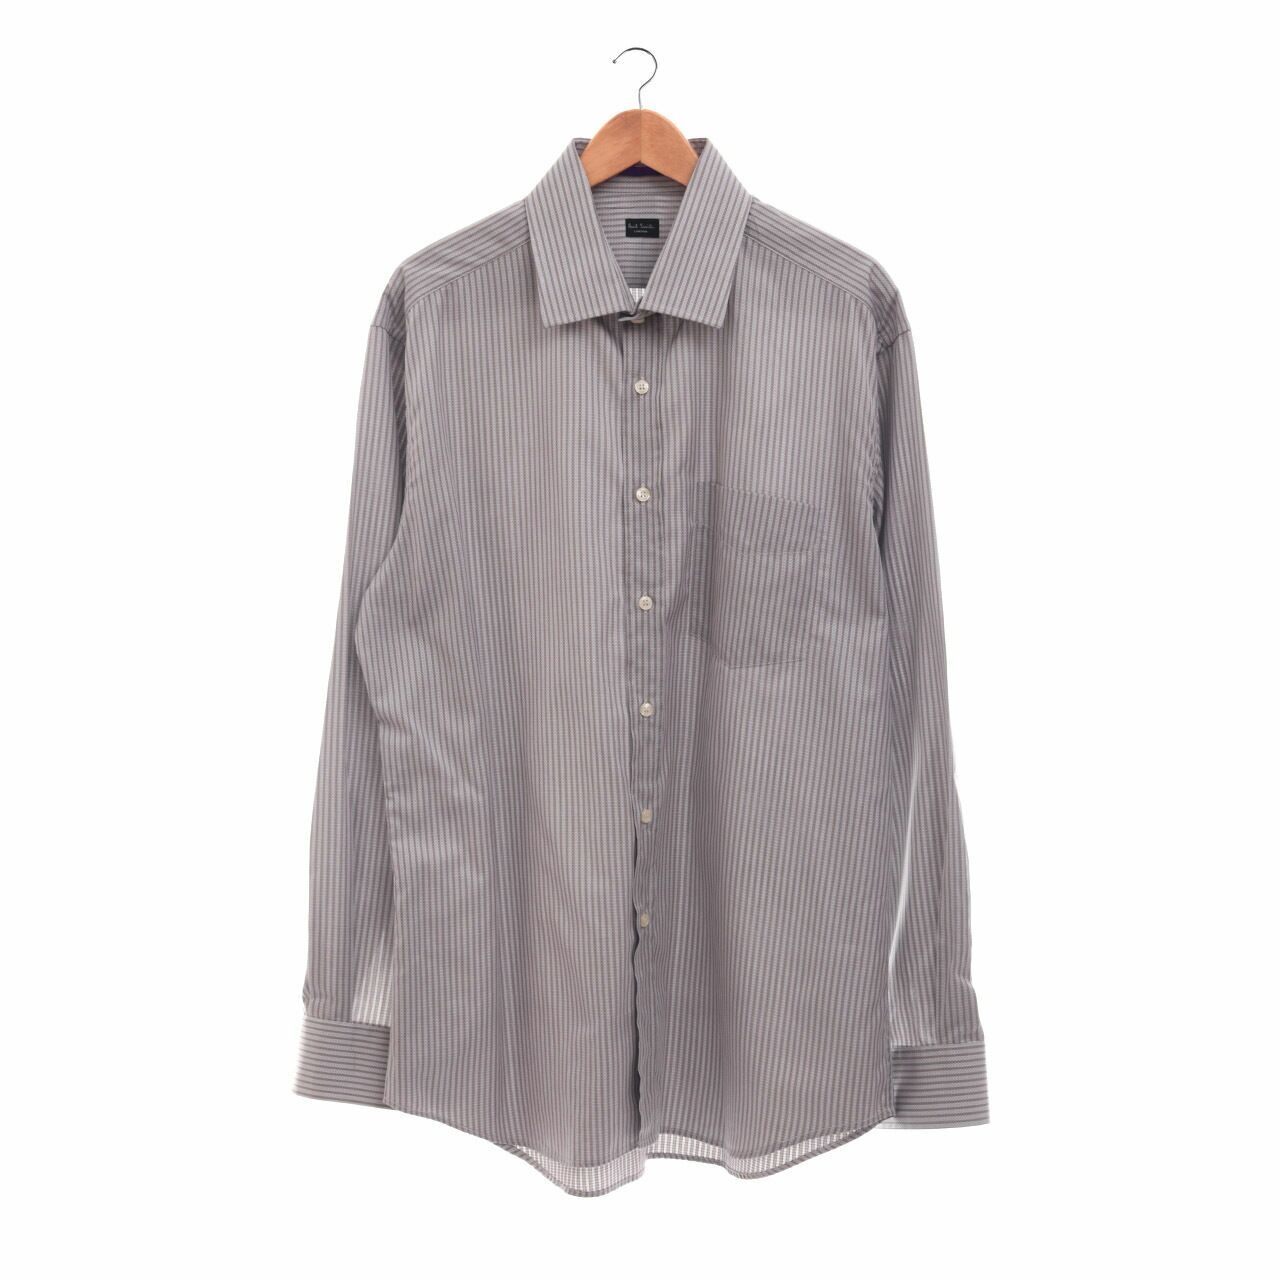 Paul Smith Grey Patterned Shirt